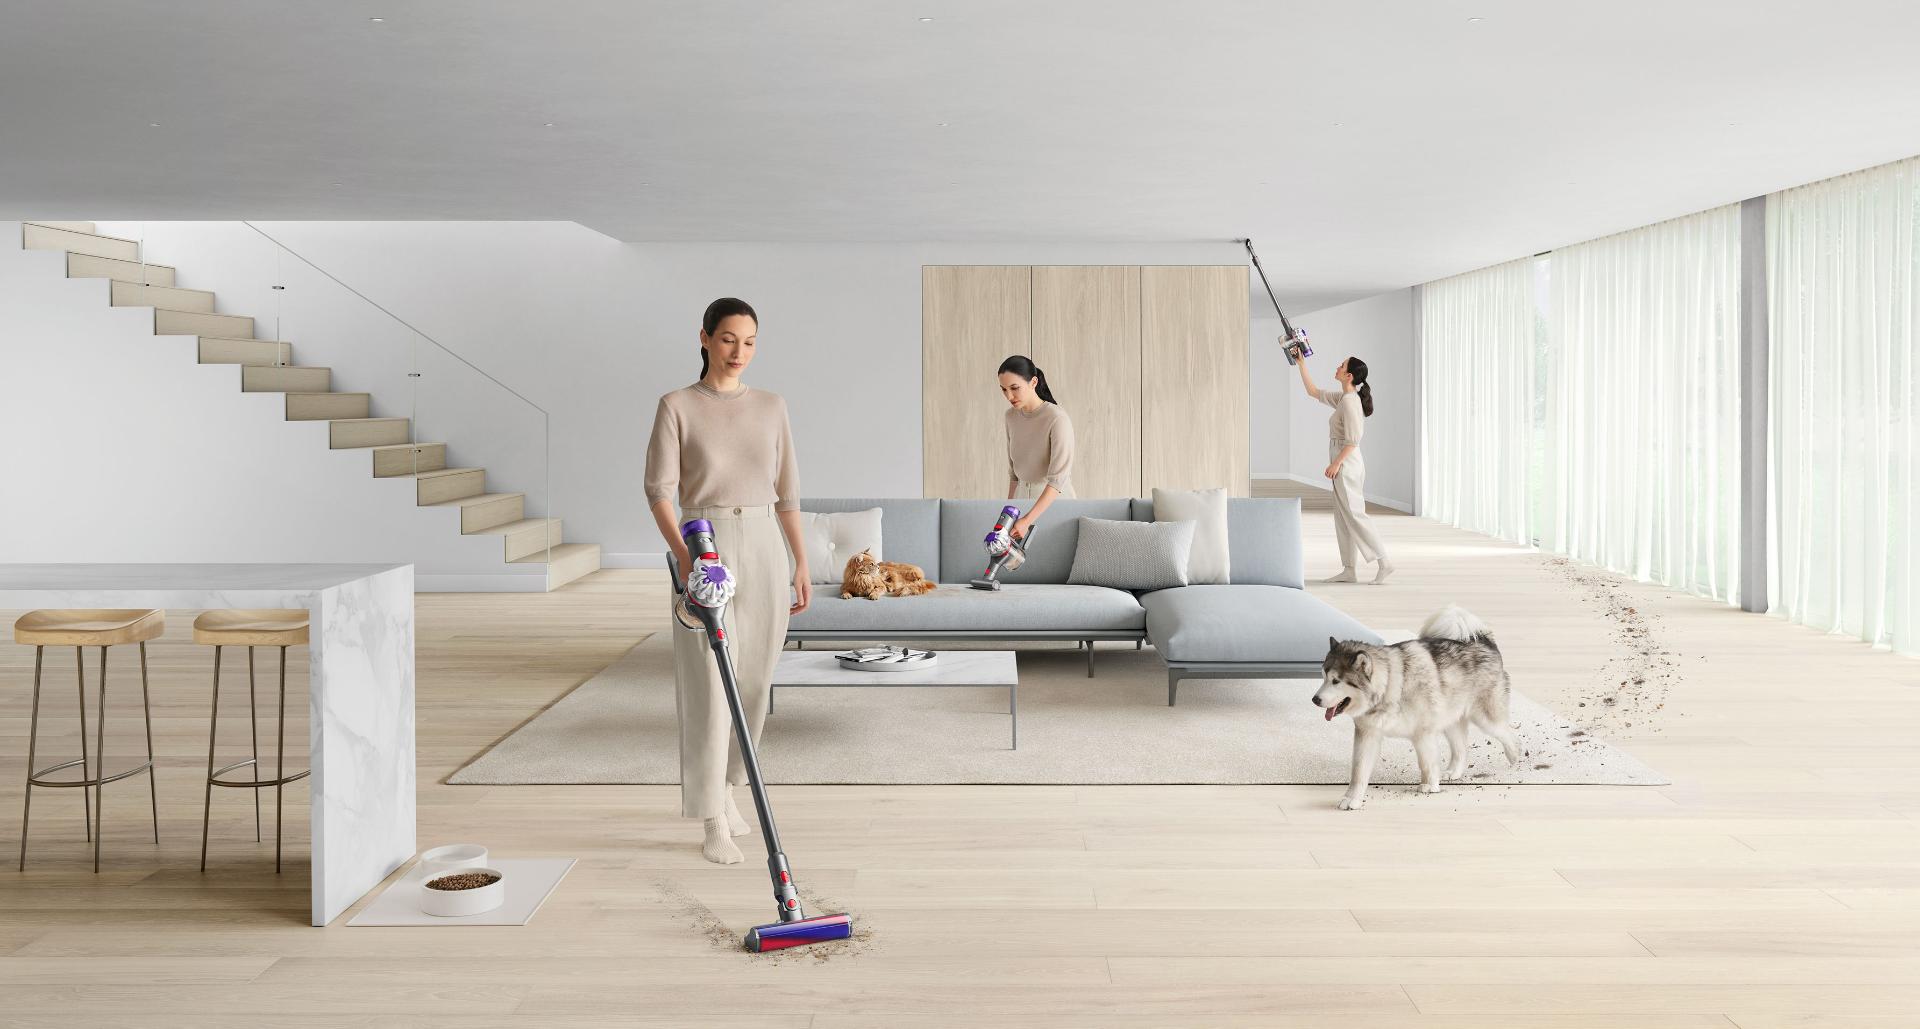 Dyson V8 vacuum cleaning hard floors and a sofa.